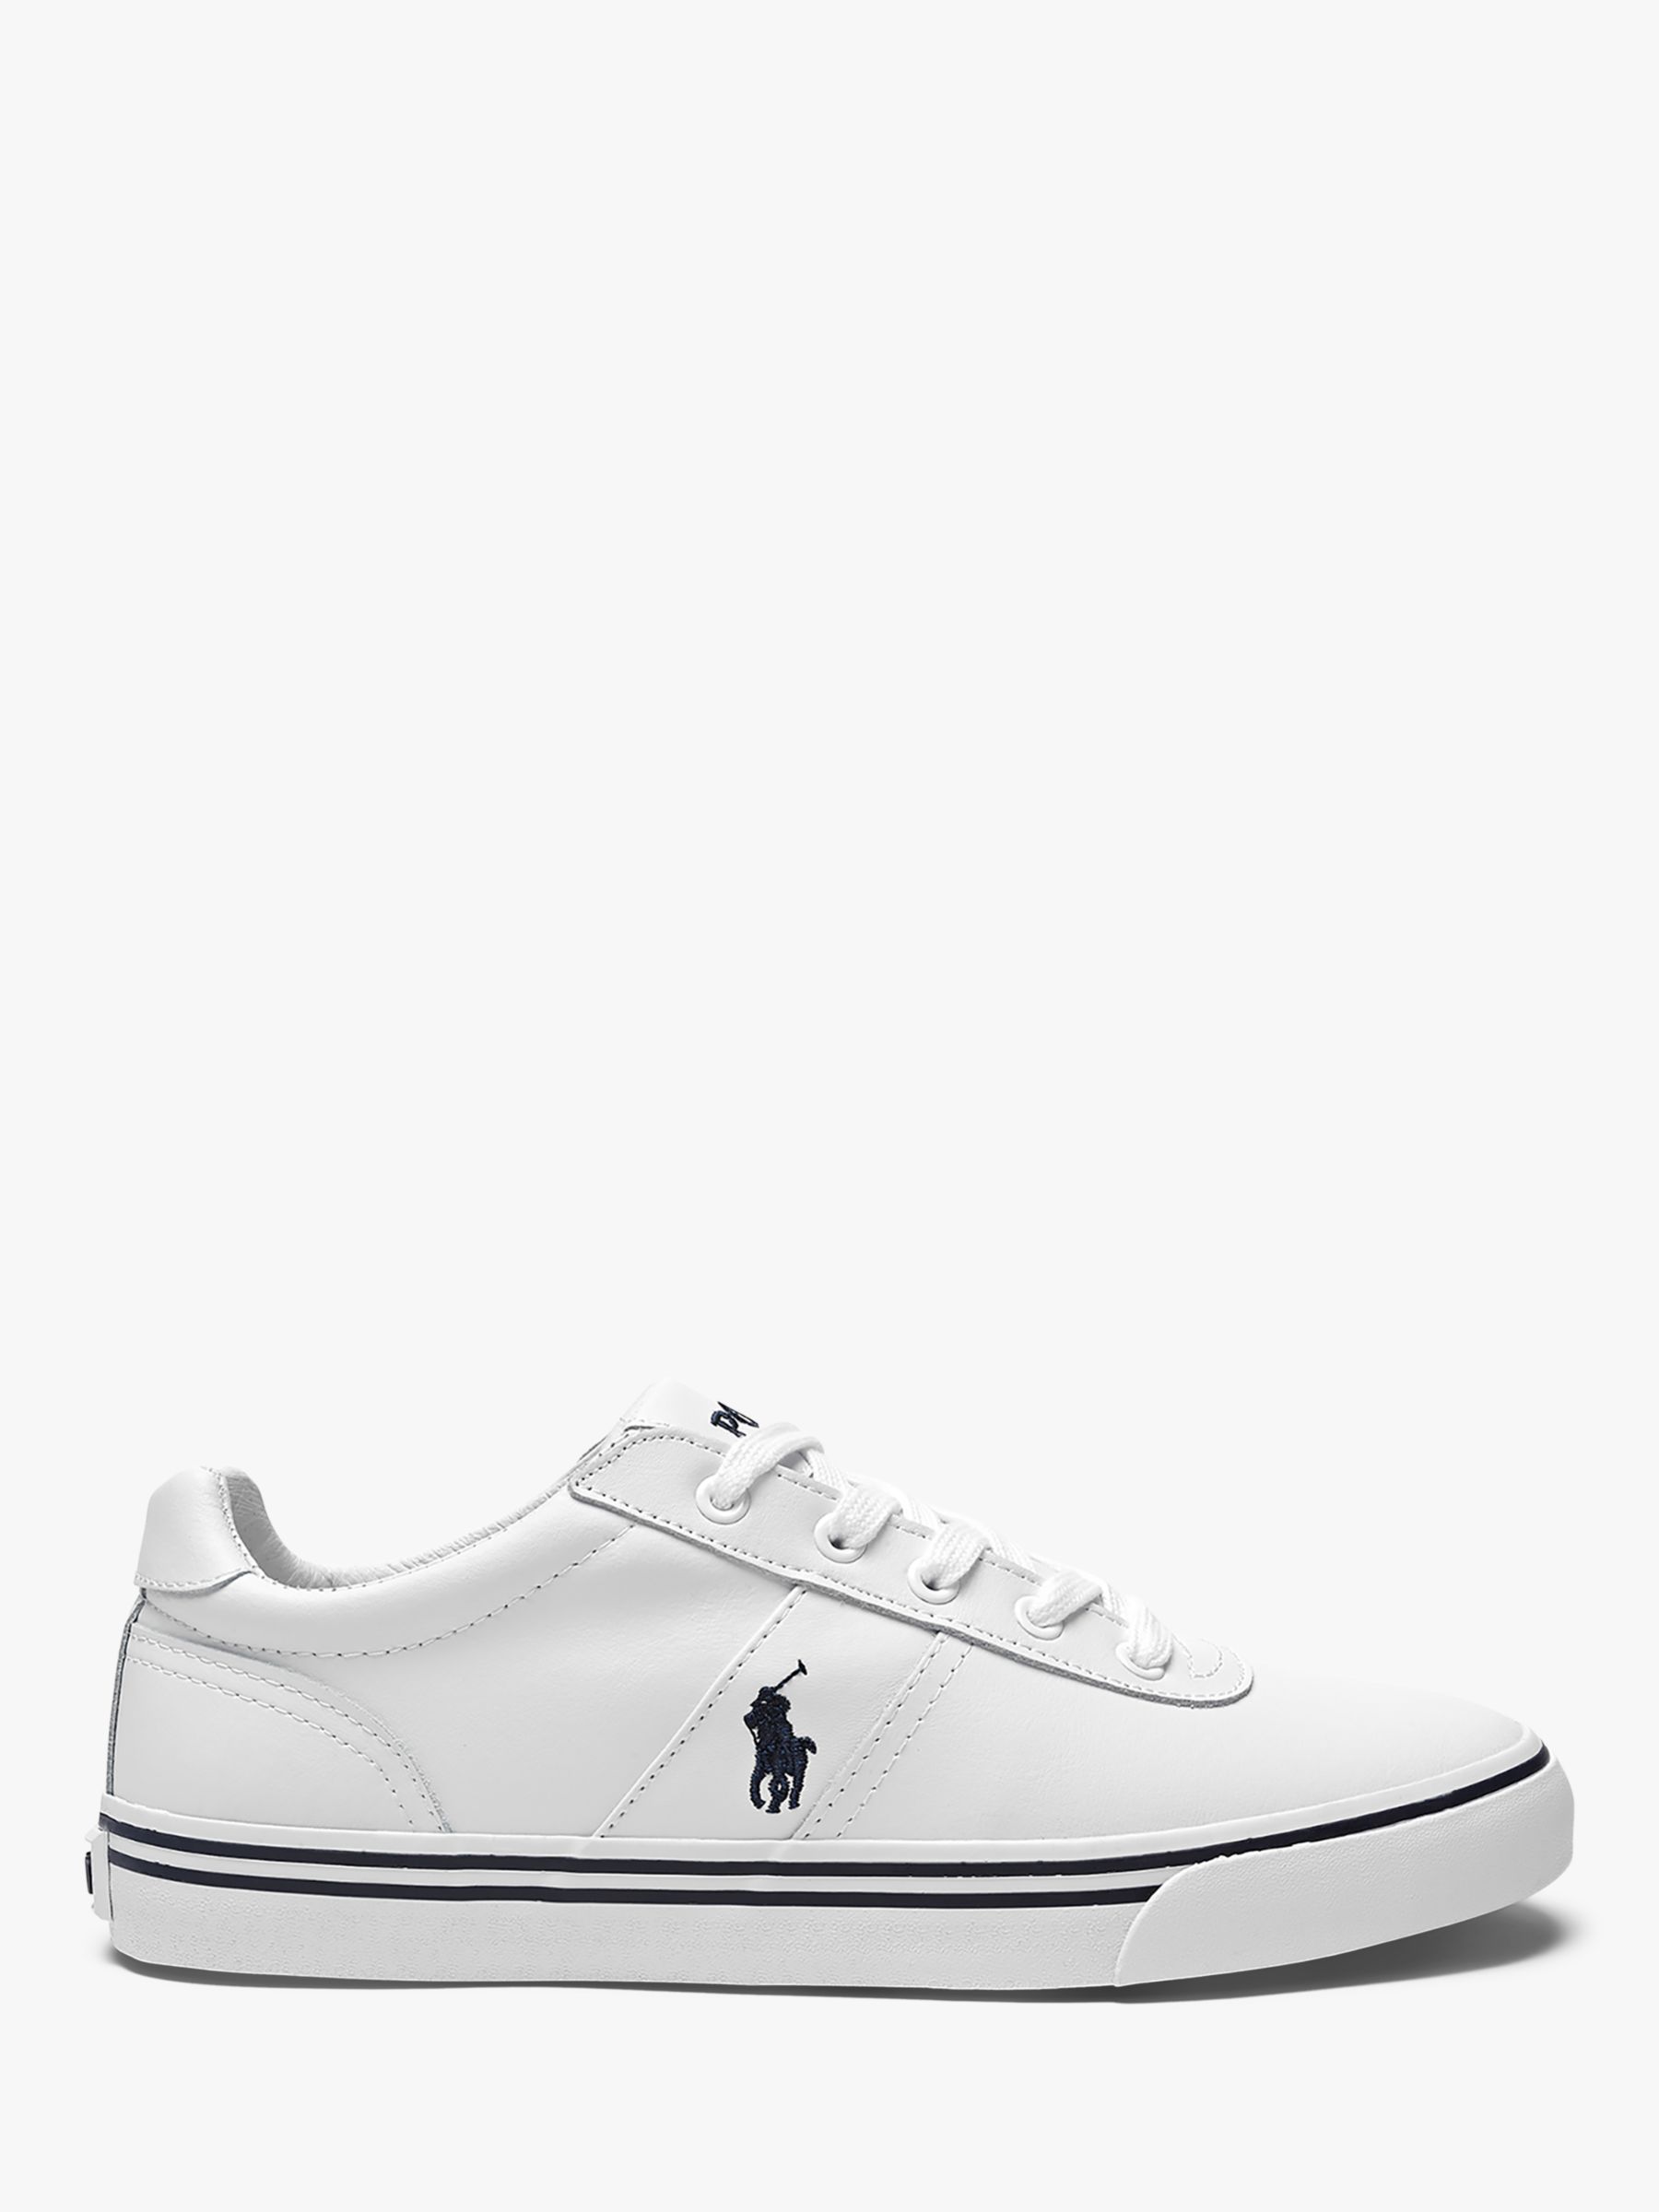 polo ralph lauren hanford leather trainers